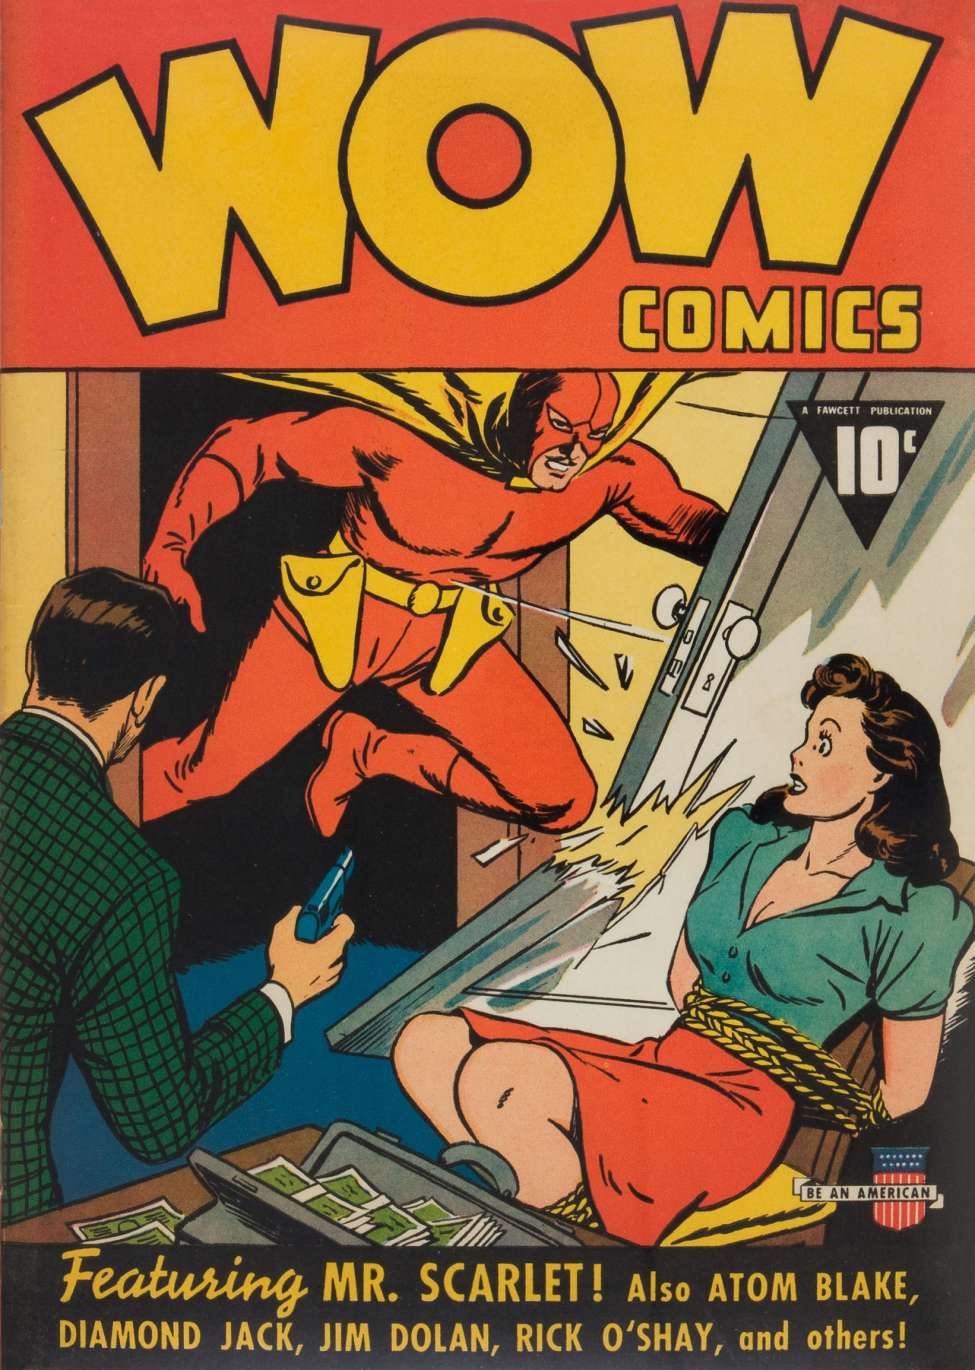 Book Cover For Wow Comics 1 - Version 1